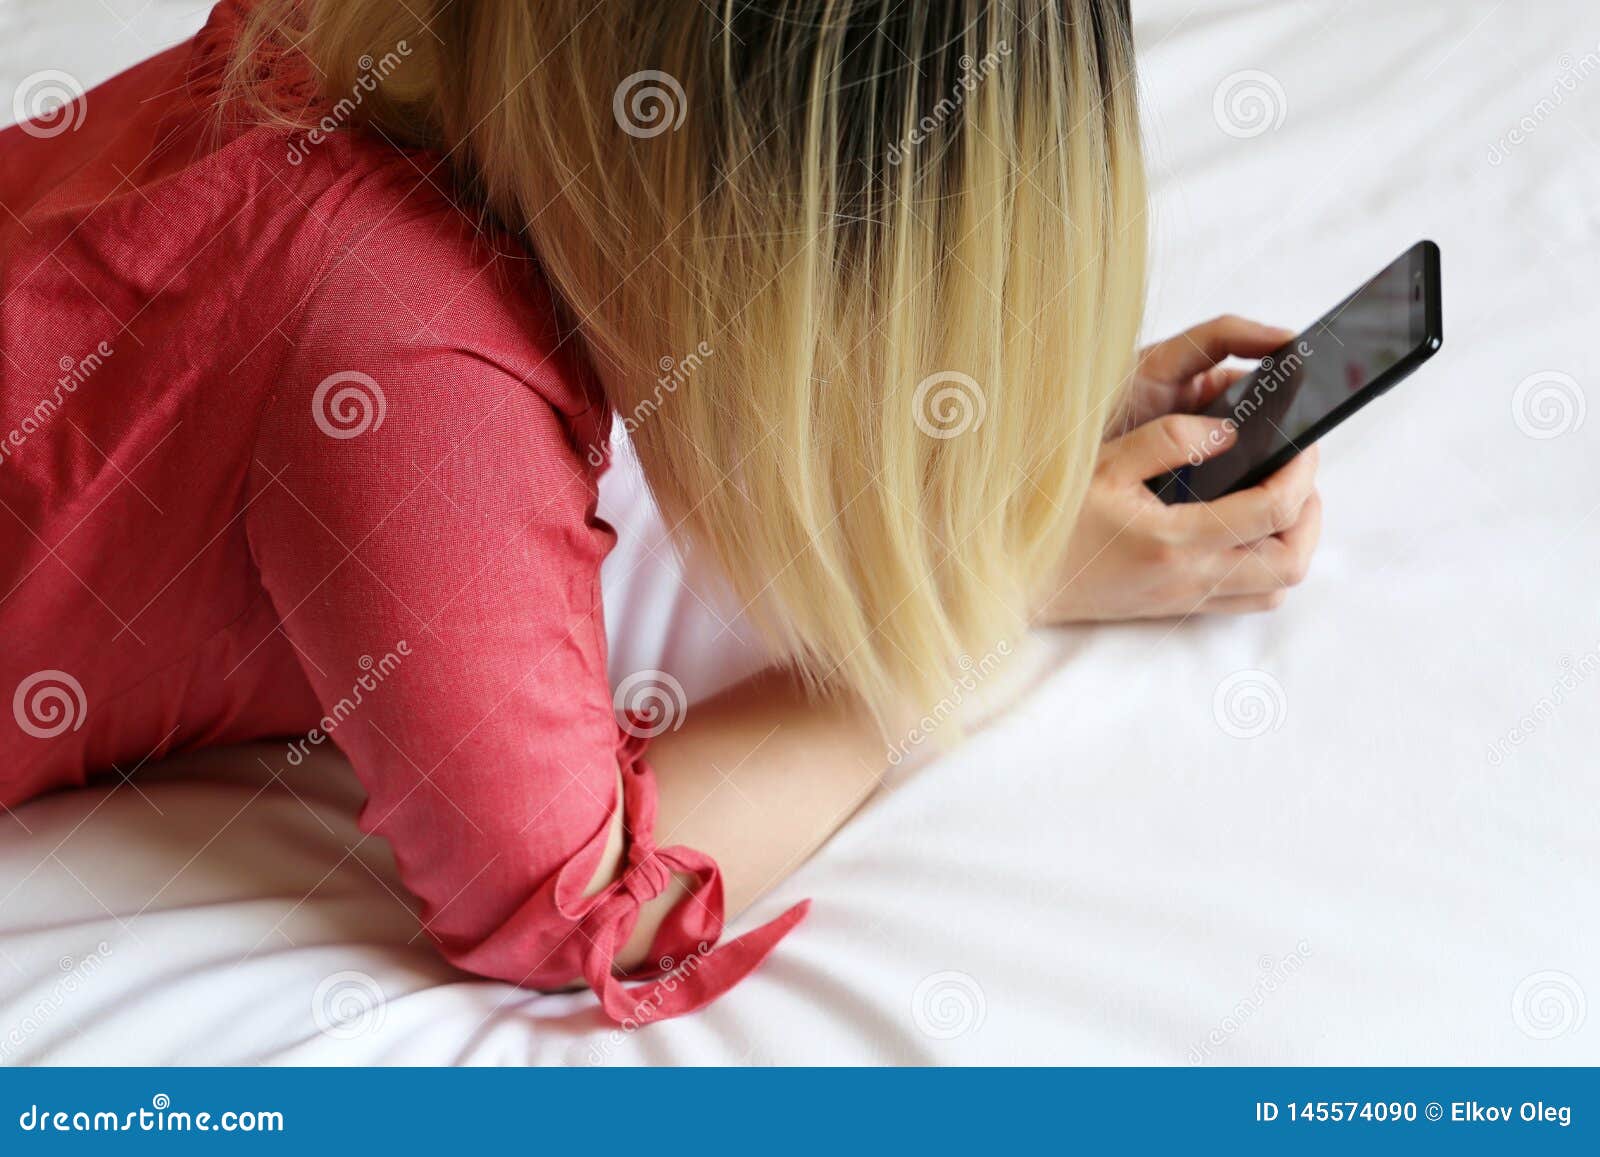 Blonde Woman with Smartphone Laying on the Bed, Girl Using Mobile Phone at Home Stock Photo pic